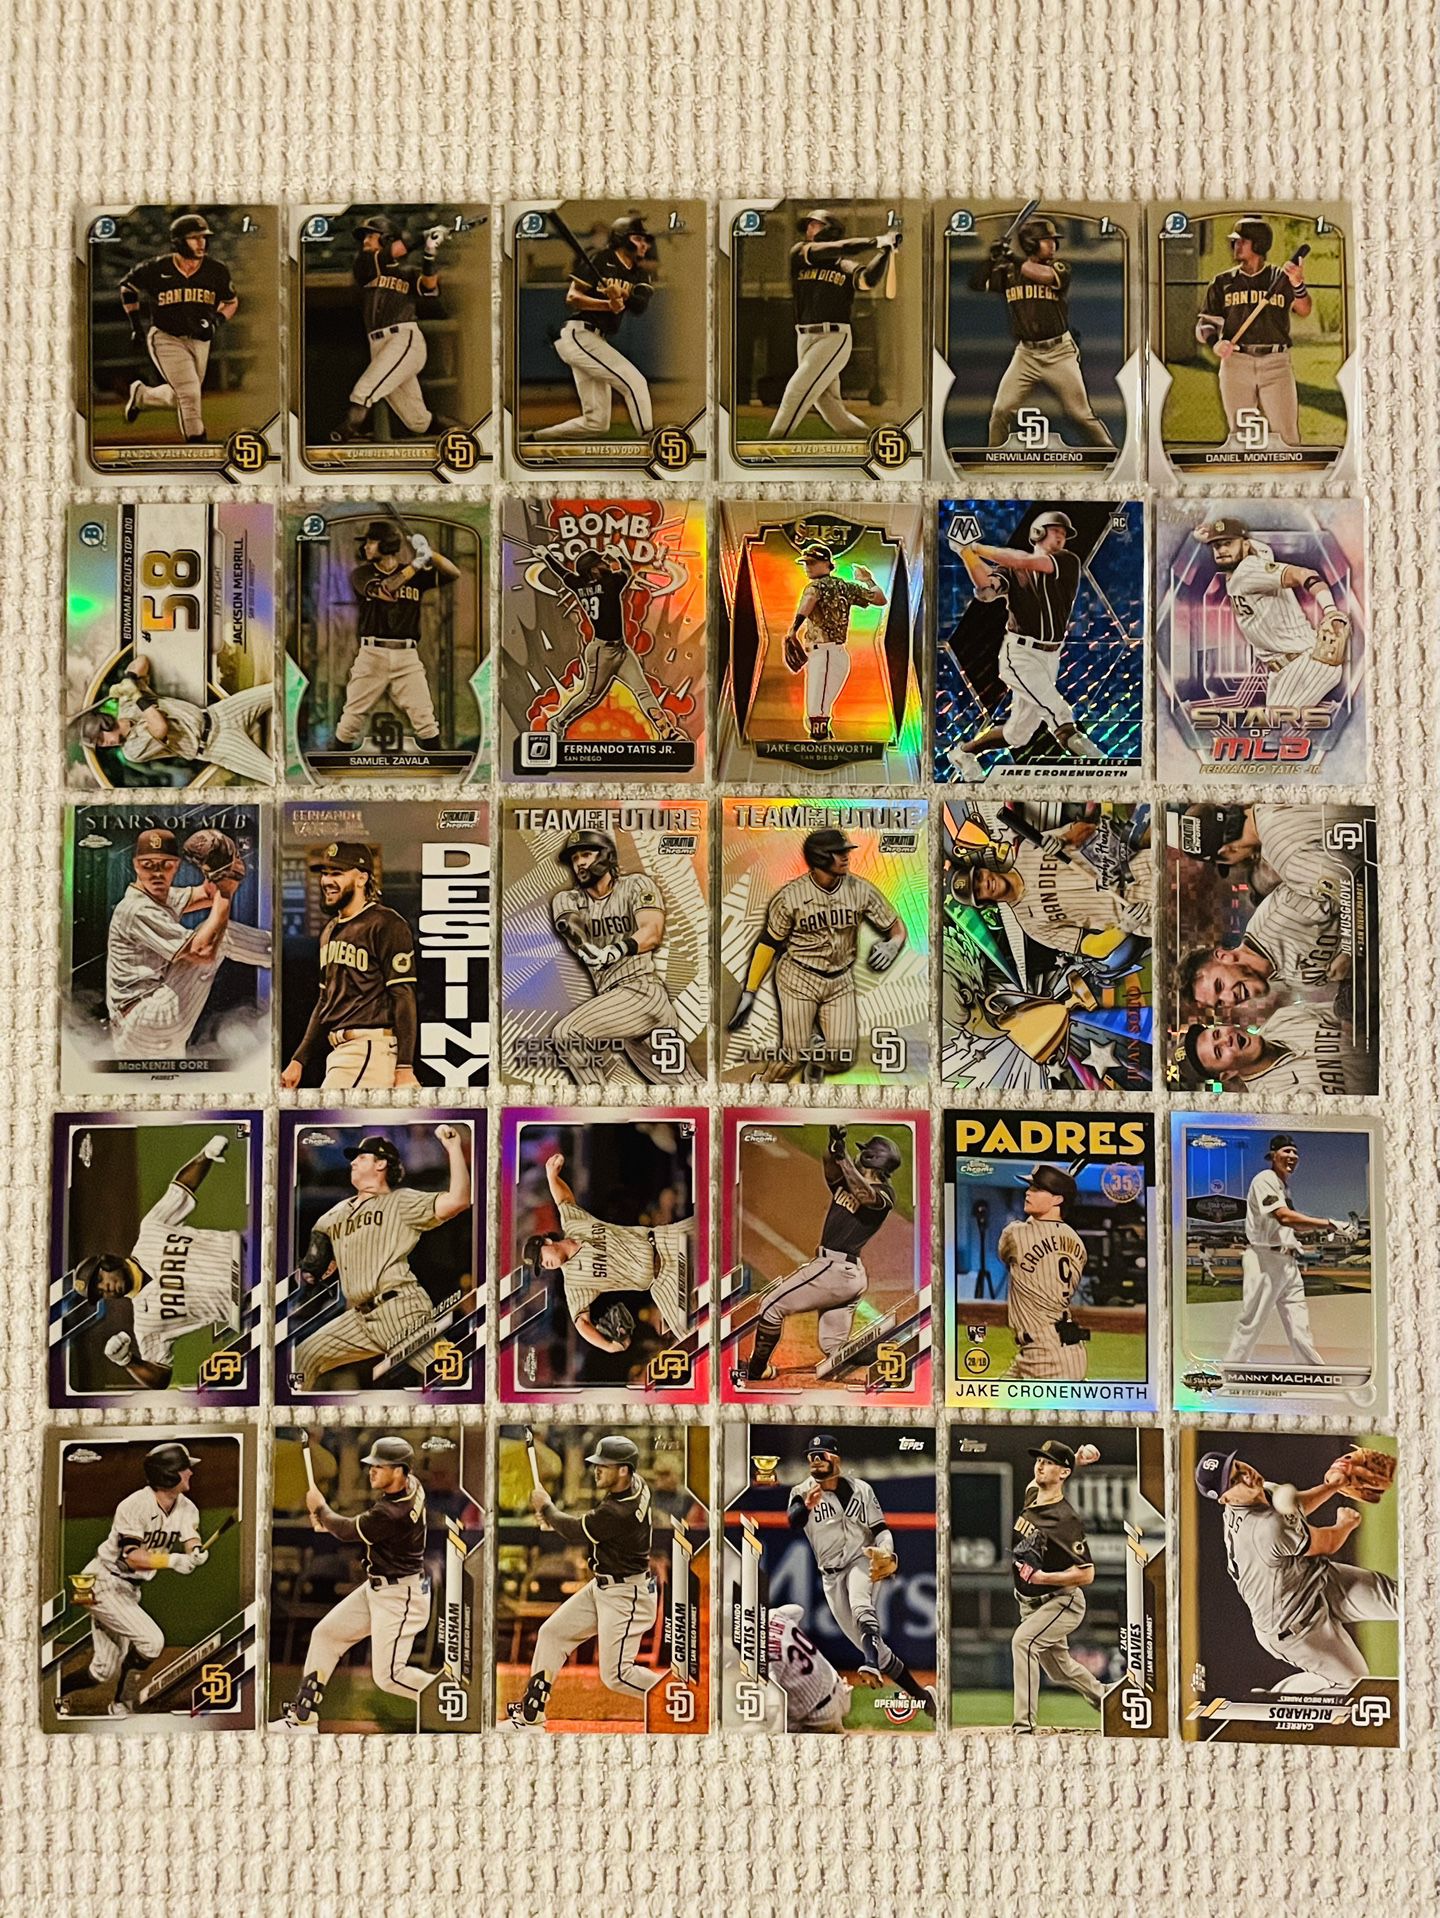 San Diego Padres 30 Card Baseball Lot! Rookies, Prospects, Parallels, Refractors, Prizms, Short Prints, Case Hits, Variations & More!